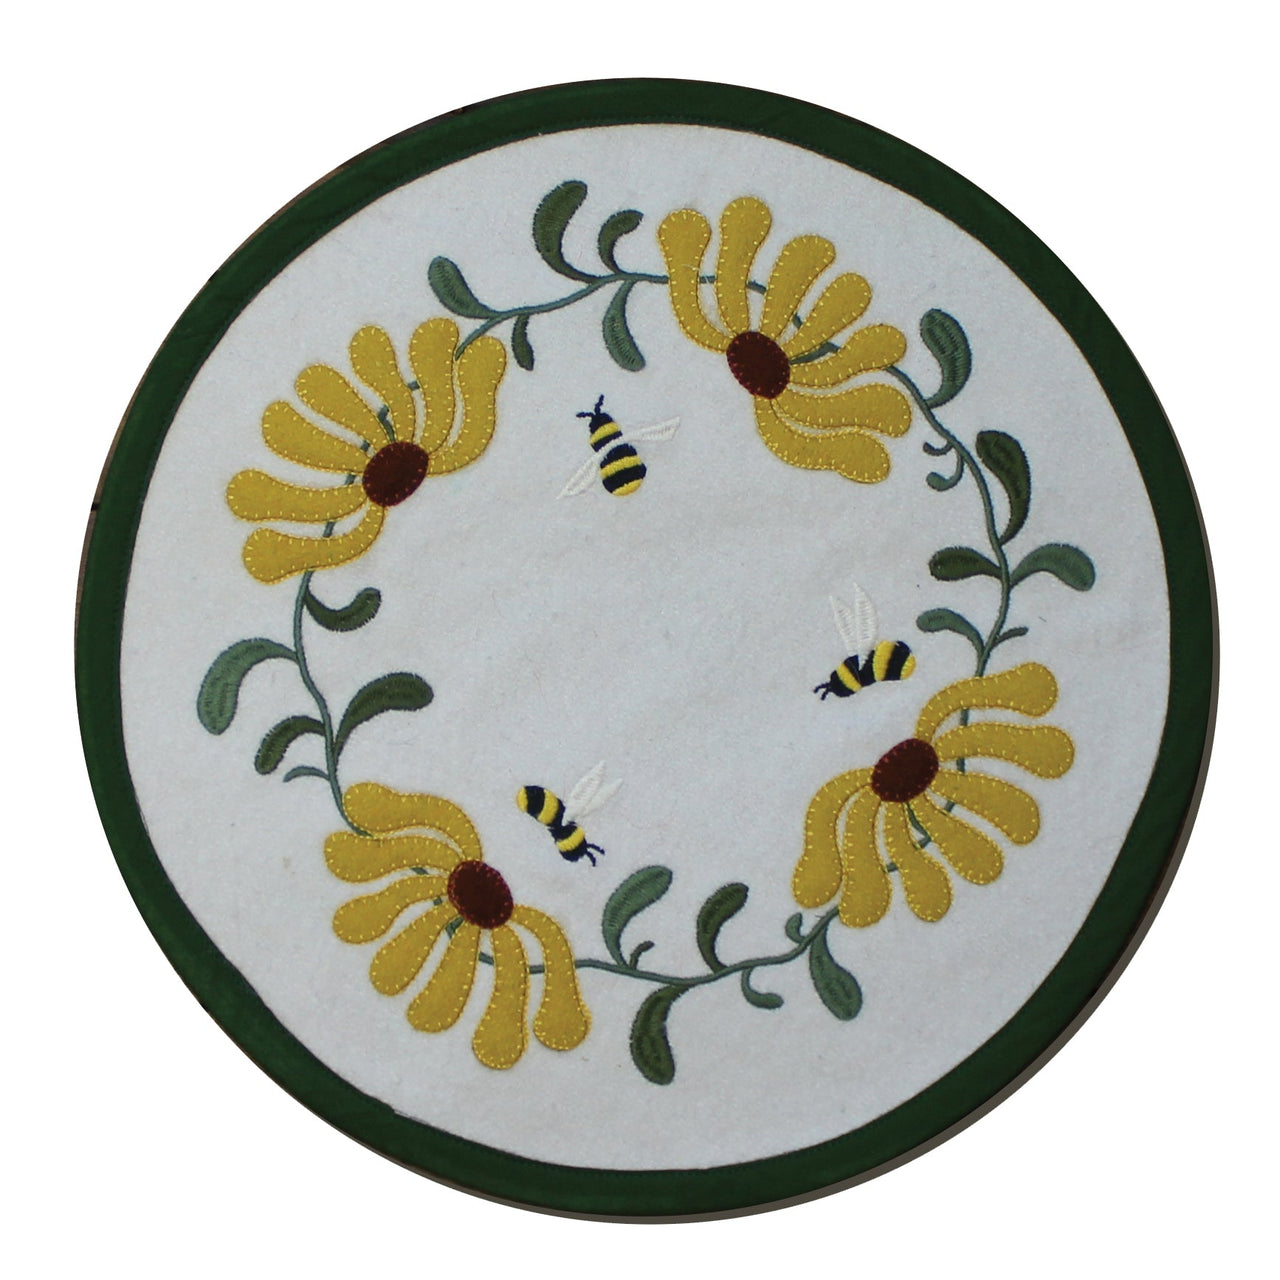 Flowers and Bees Candle Mat - Interiors by Elizabeth